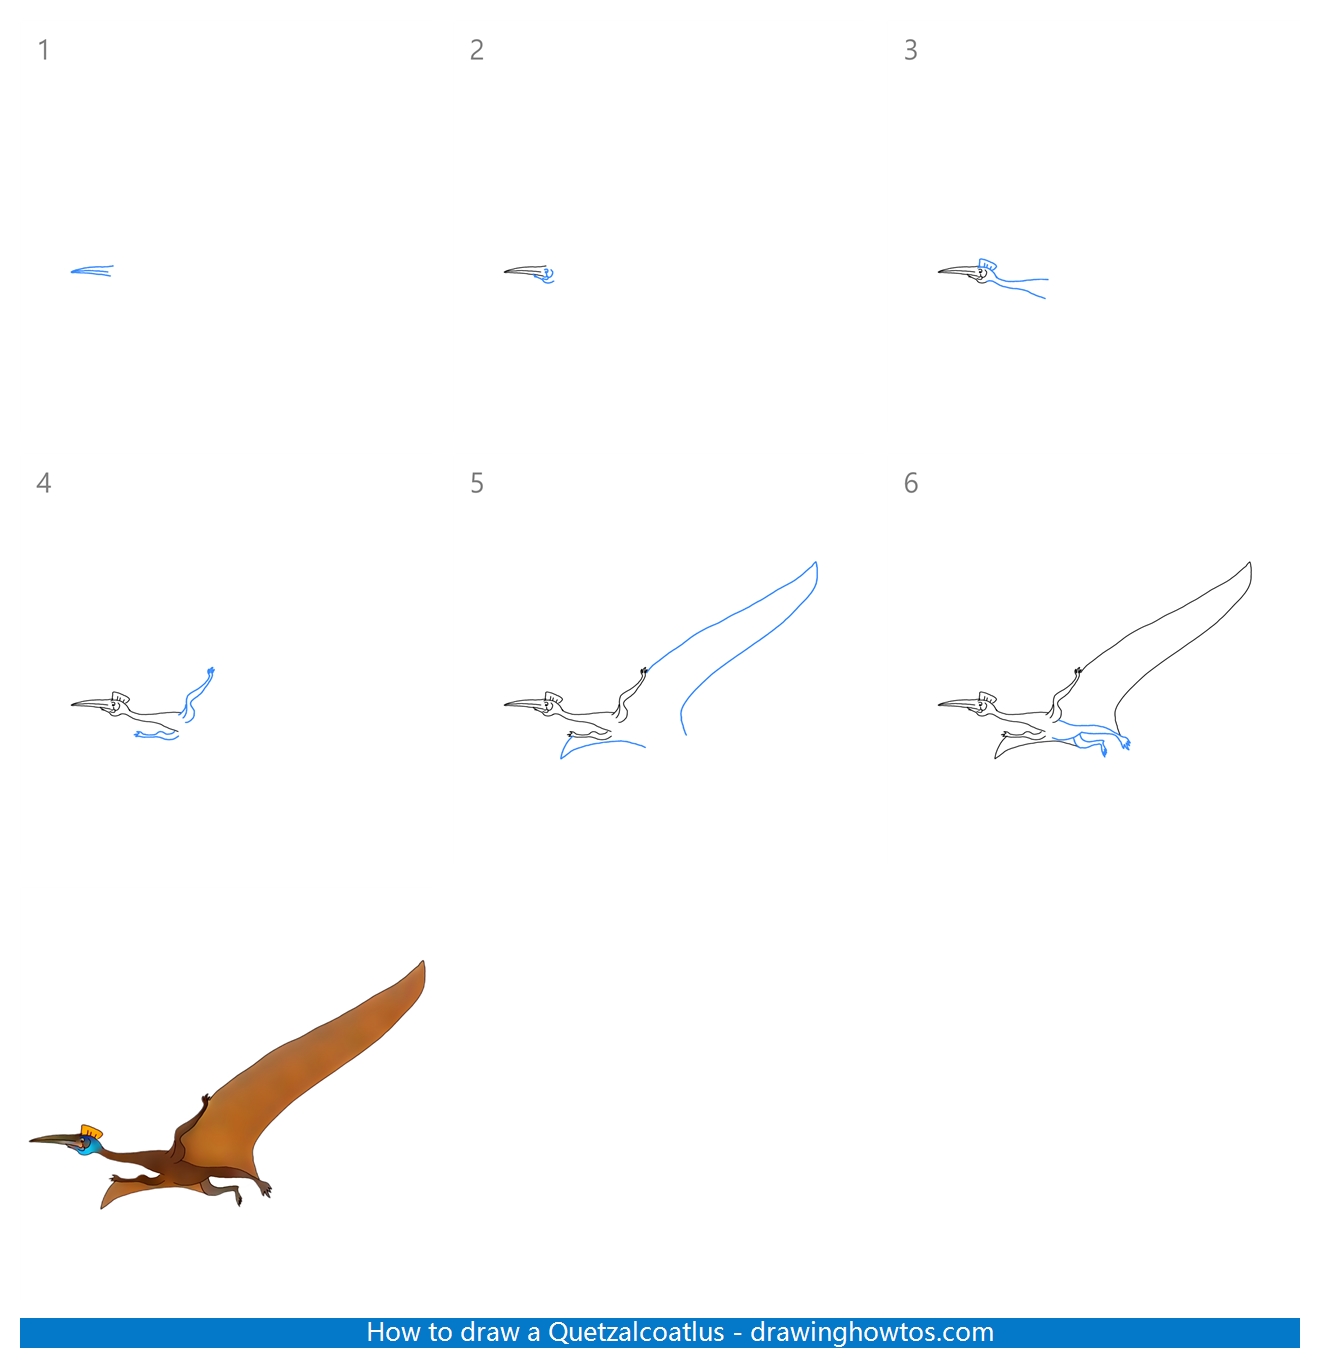 How to Draw a Quetzalcoatlus Step by Step